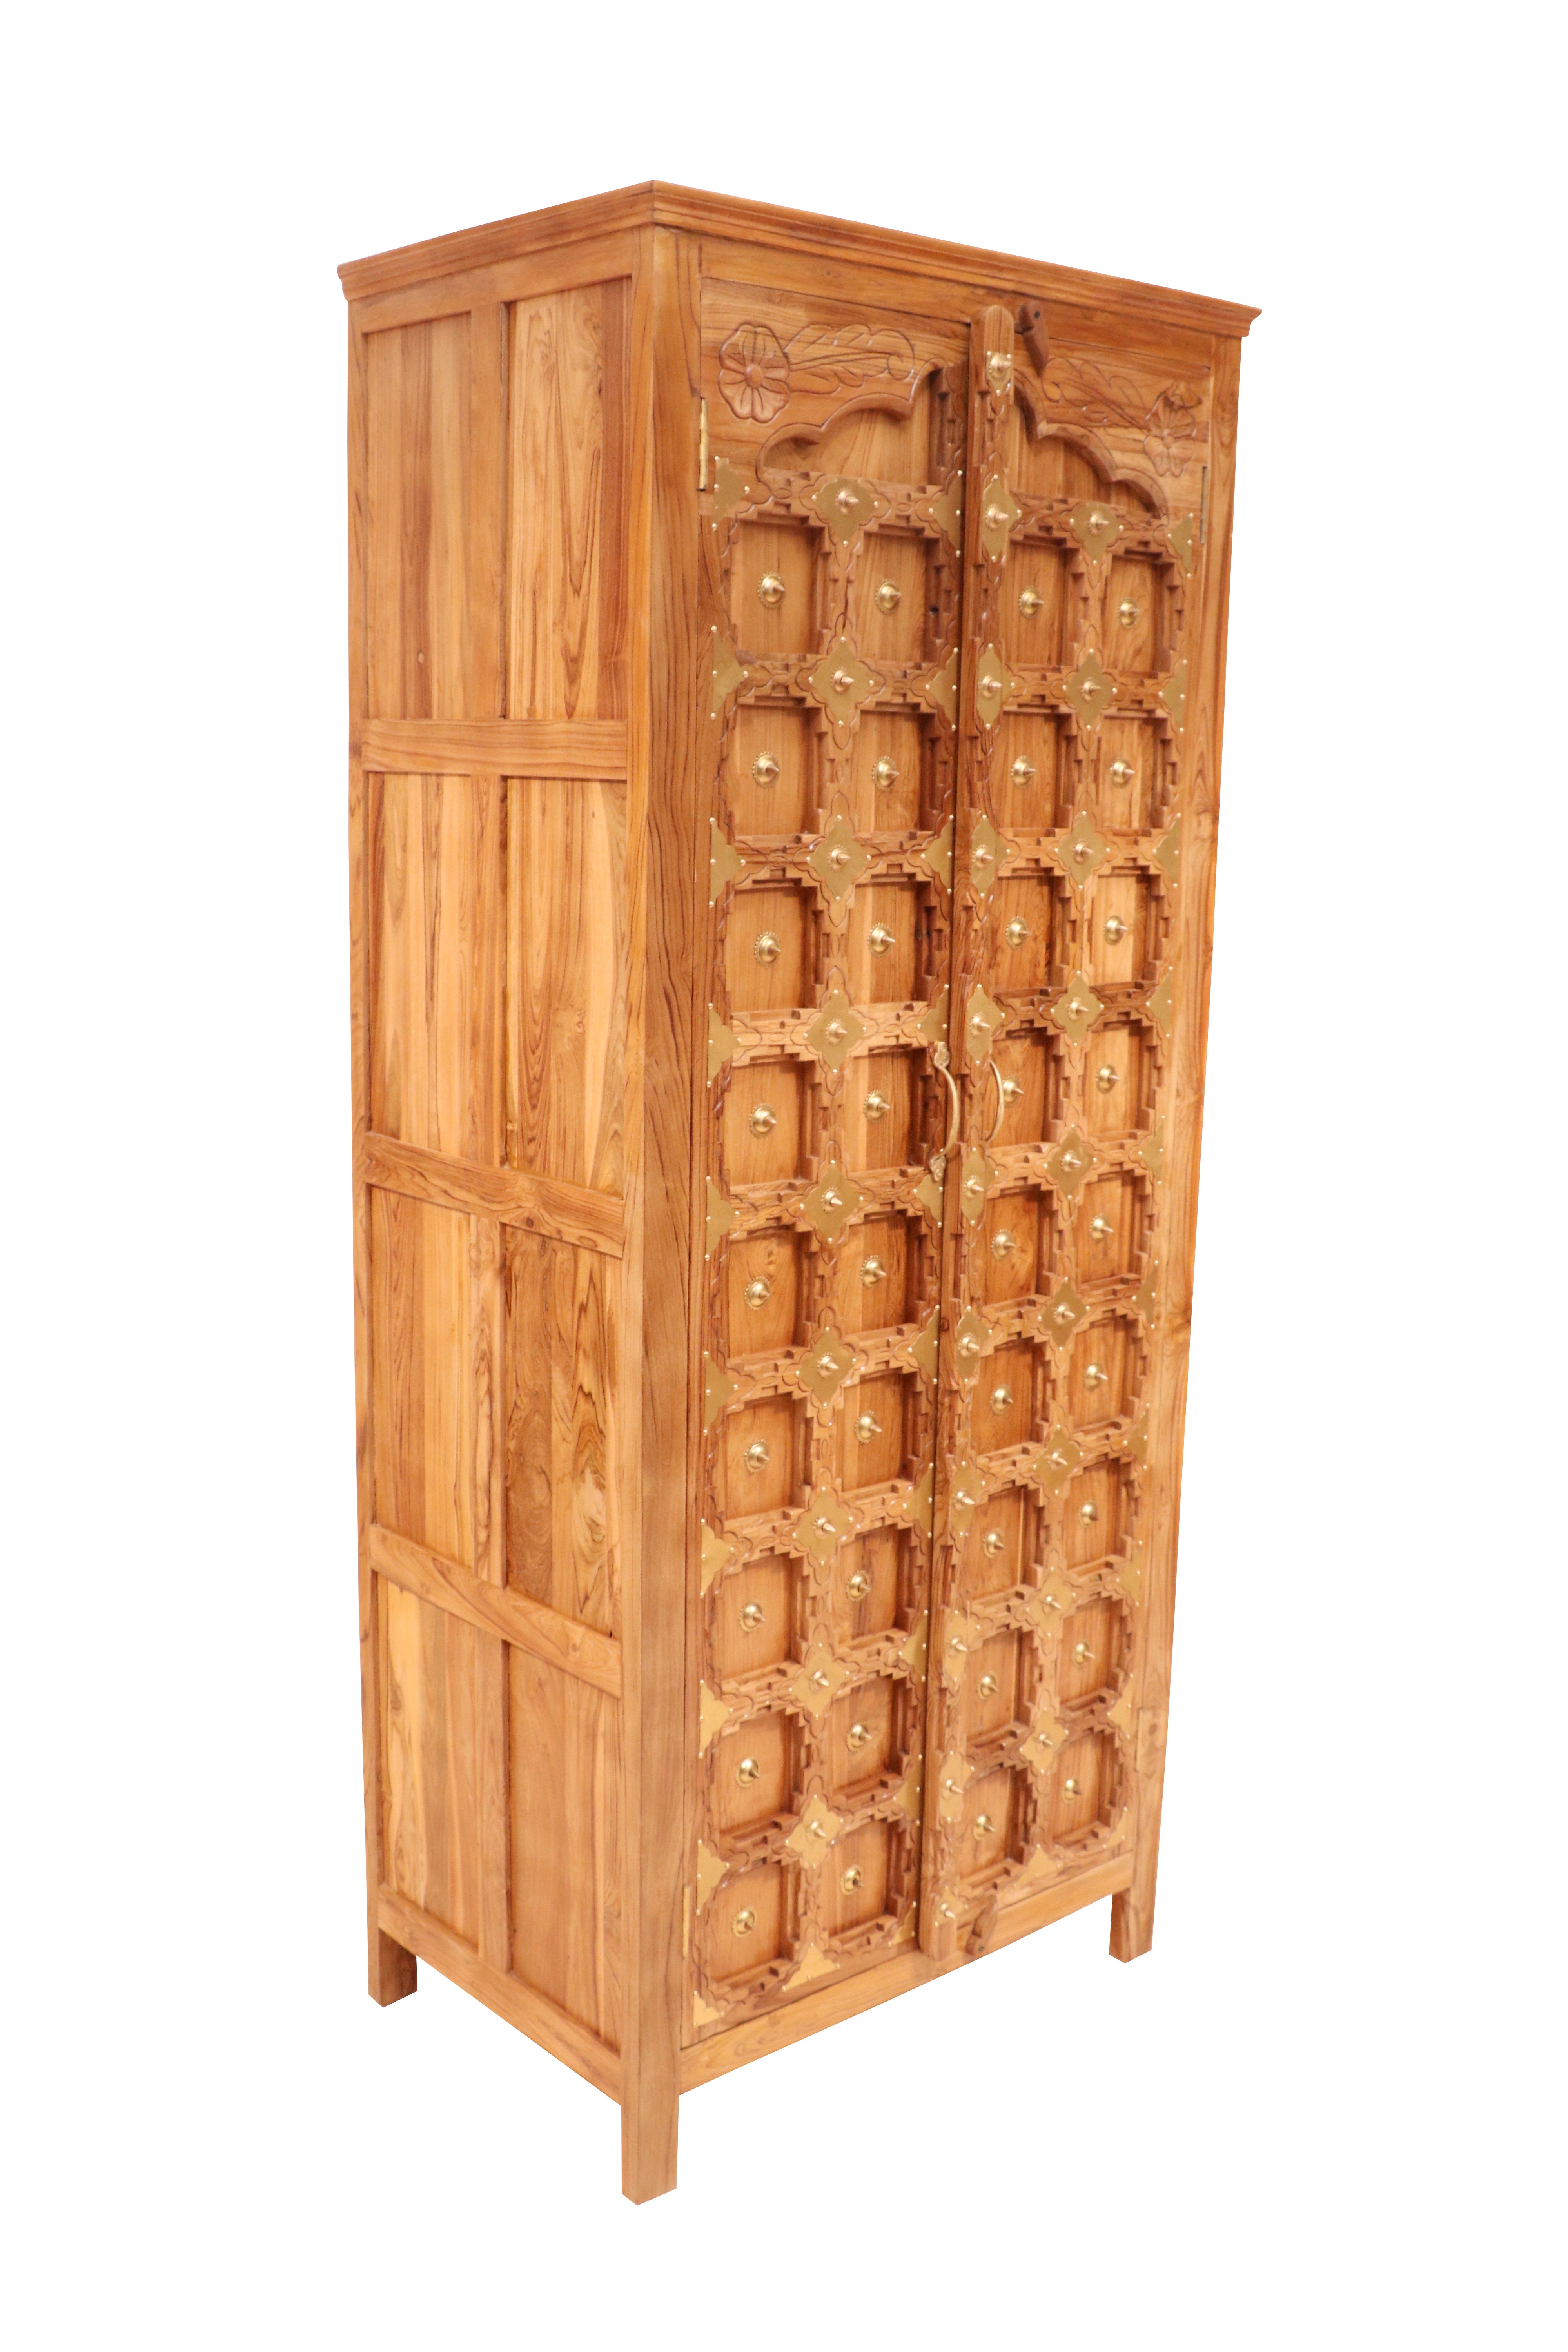 Classic Multiple Storage & Block Style Handmade Large Wooden Cupboard for Home Wardrobe